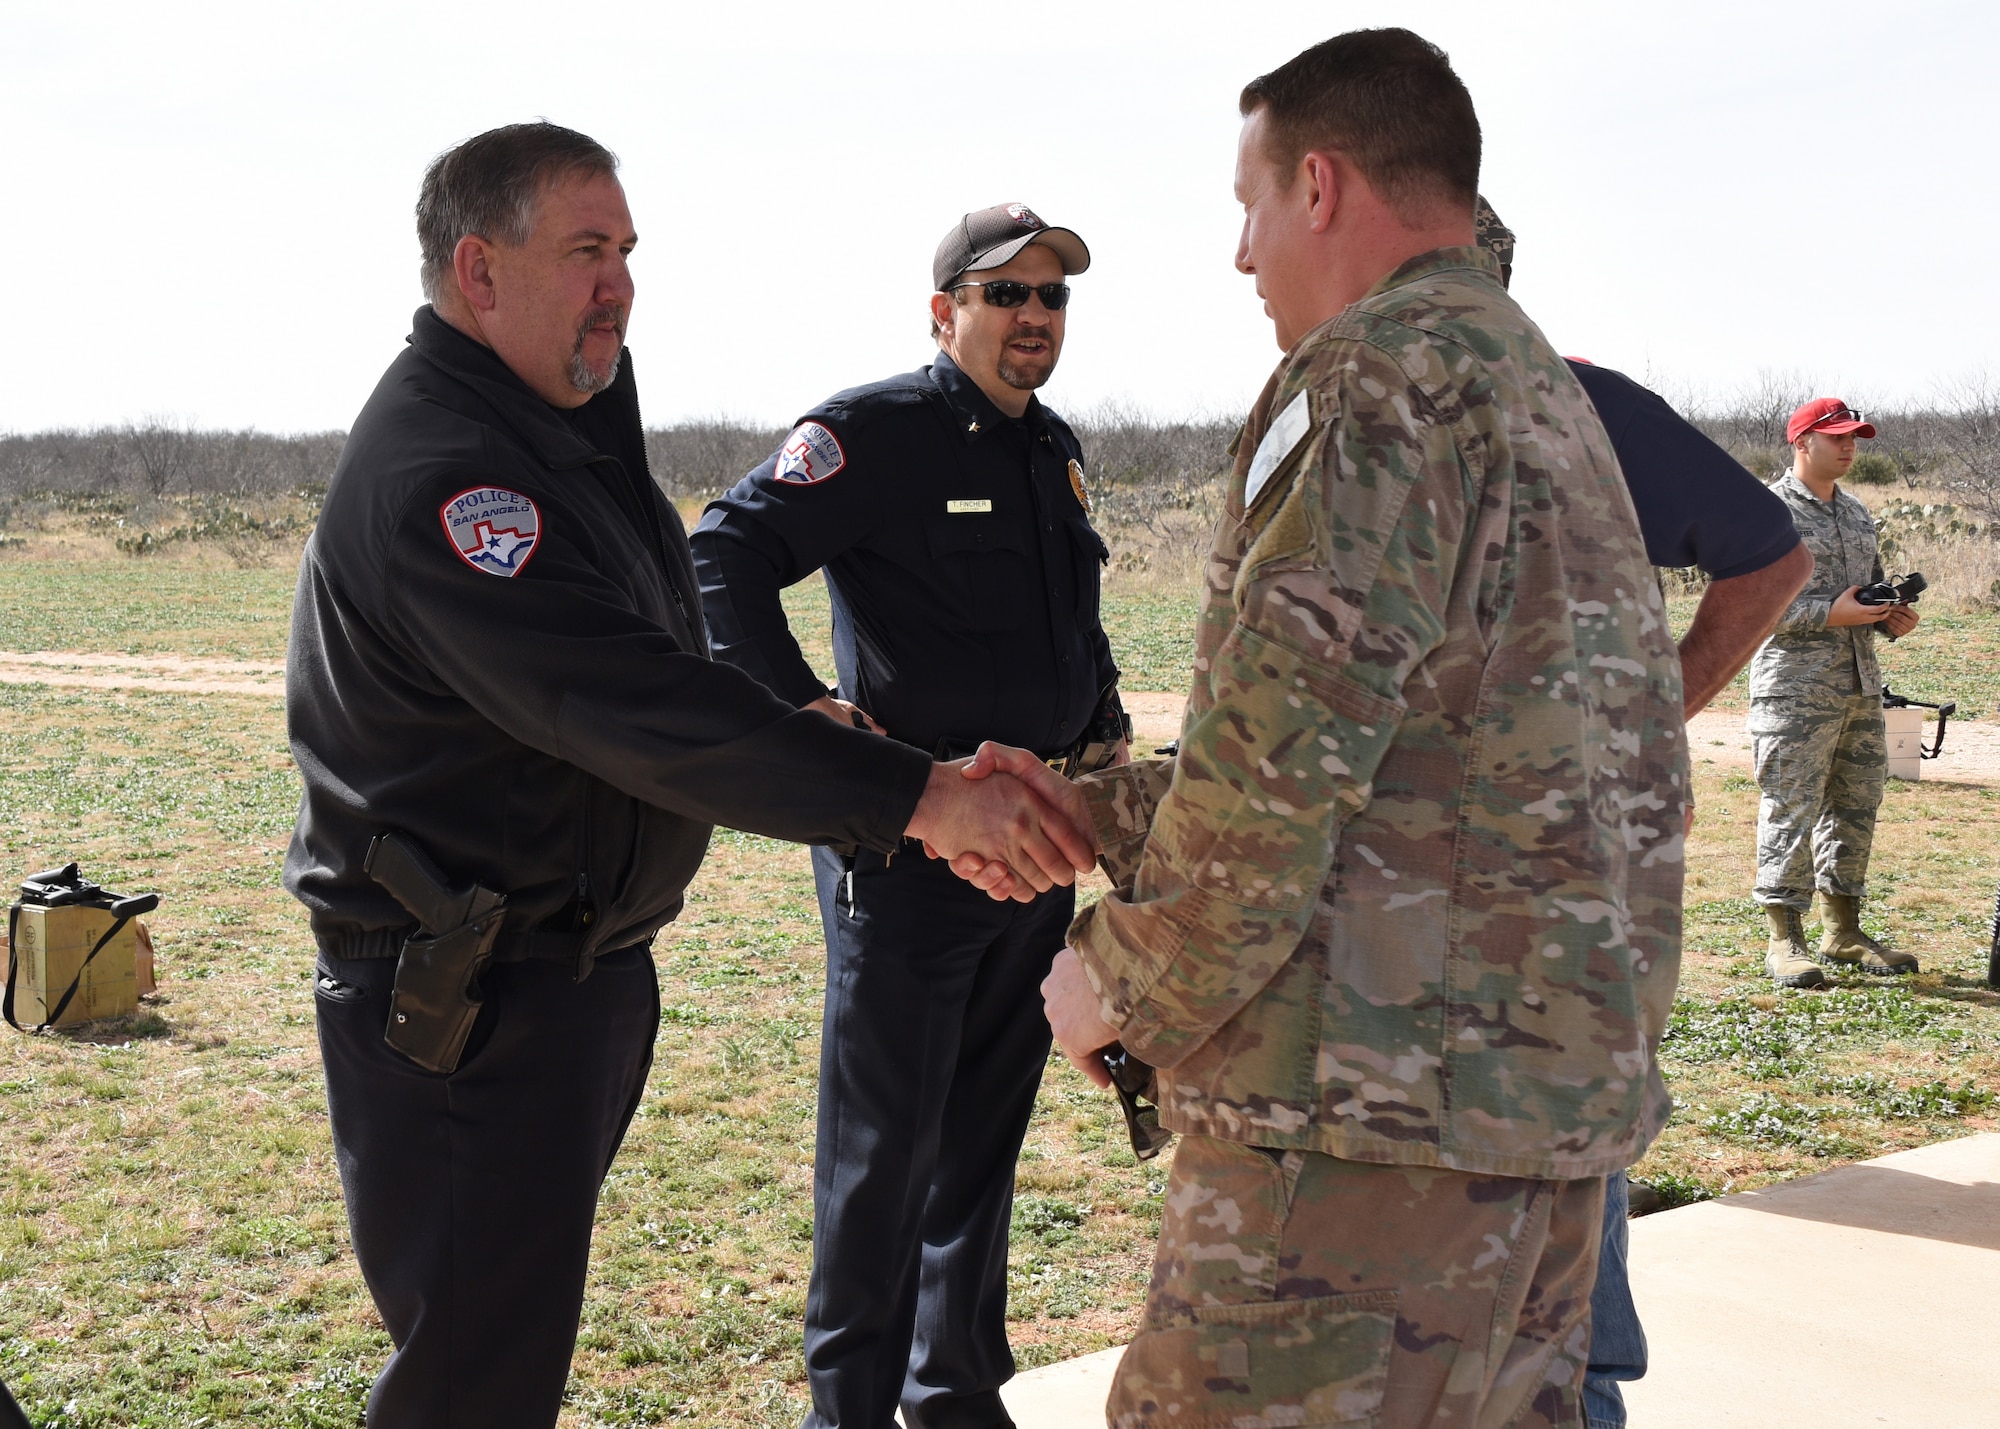 U.S. Air Force Master Sgt. Seth Swaboski, 17th Security Forces Squadron advisor, is greeted by San Angelo Police Depart Chief of Police, Frank Carter and SAPD Assistant Chief, Tracey Fincher at the SAPD firing range, Texas, during a demonstration of Goodfellow’s grenade launchers, Feb. 15, 2019.  One of the many agreements San Angelo and Goodfellow has allows the SAPD and Goodfellow to train on the other’s firing range when needed. (U.S. Air Force photo by Airman 1st Class Zachary Chapman/Released)